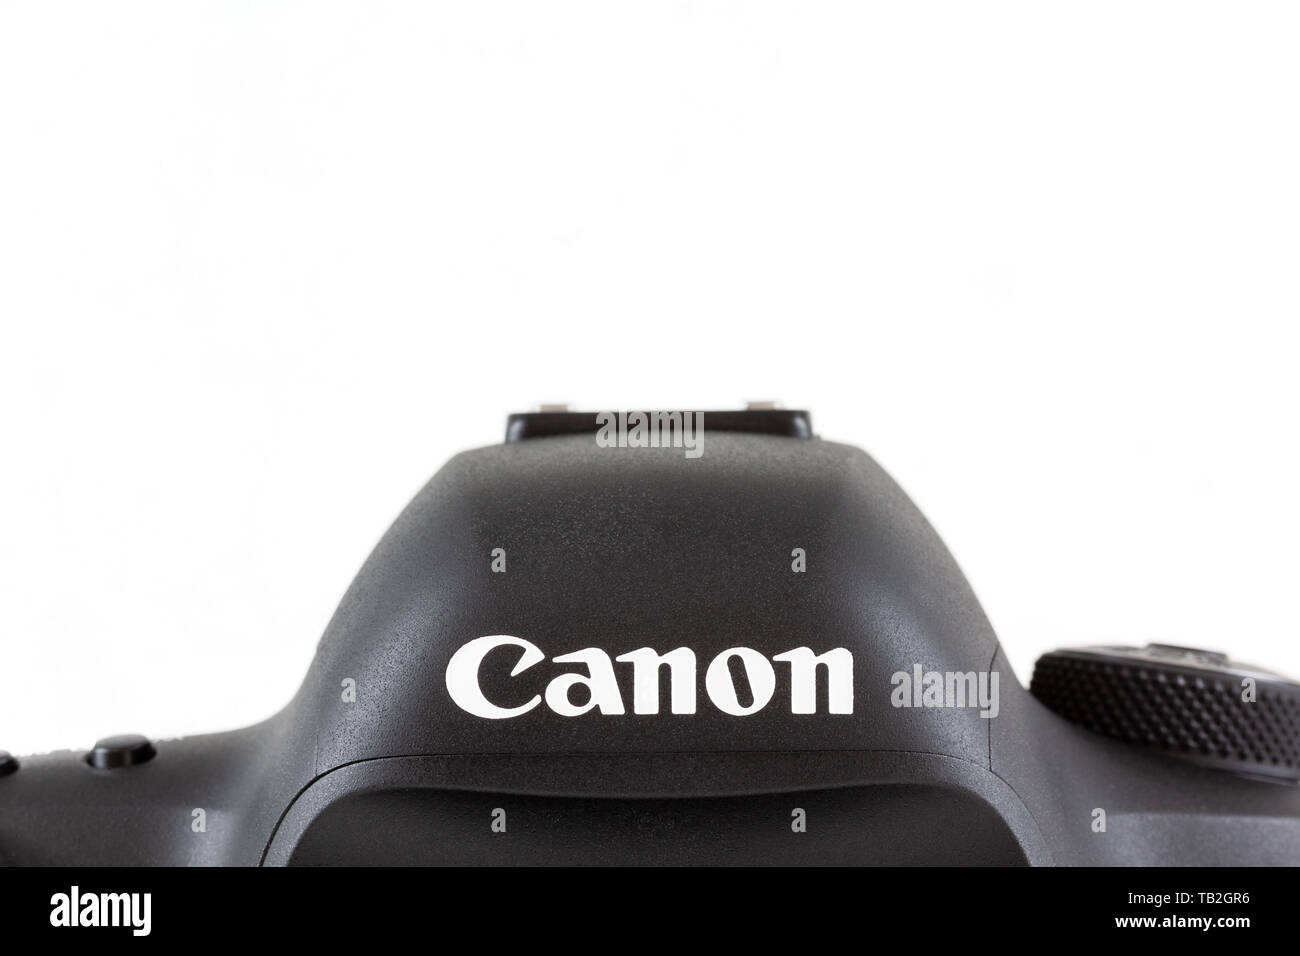 Canon 5D Mark IV DSLR Camera photographed against a white background. Stock Photo